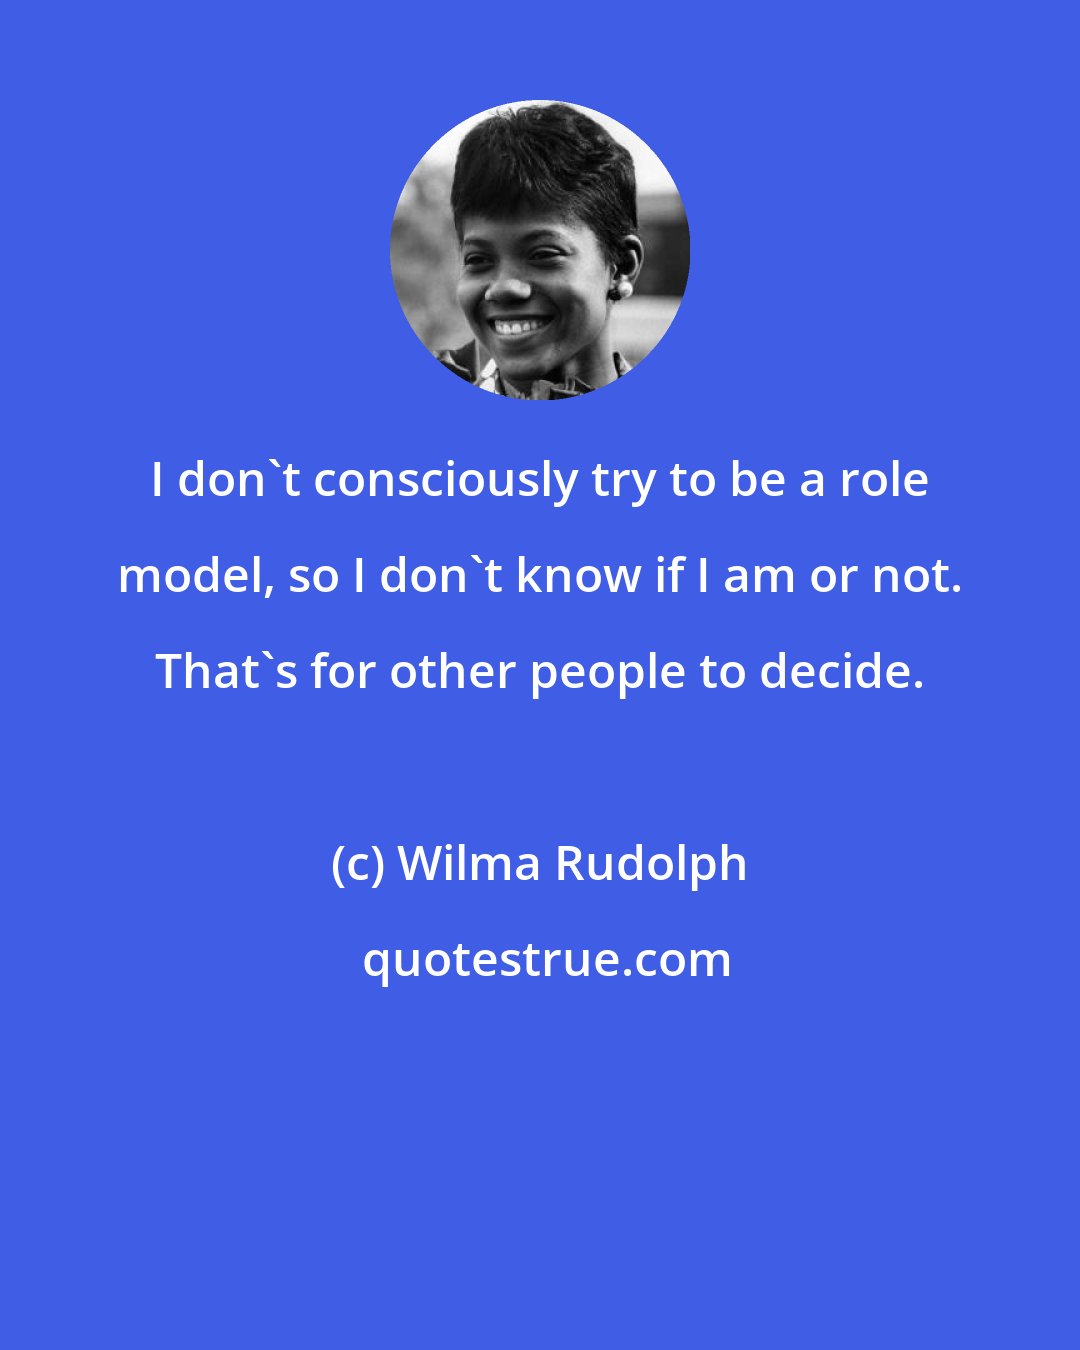 Wilma Rudolph: I don't consciously try to be a role model, so I don't know if I am or not. That's for other people to decide.